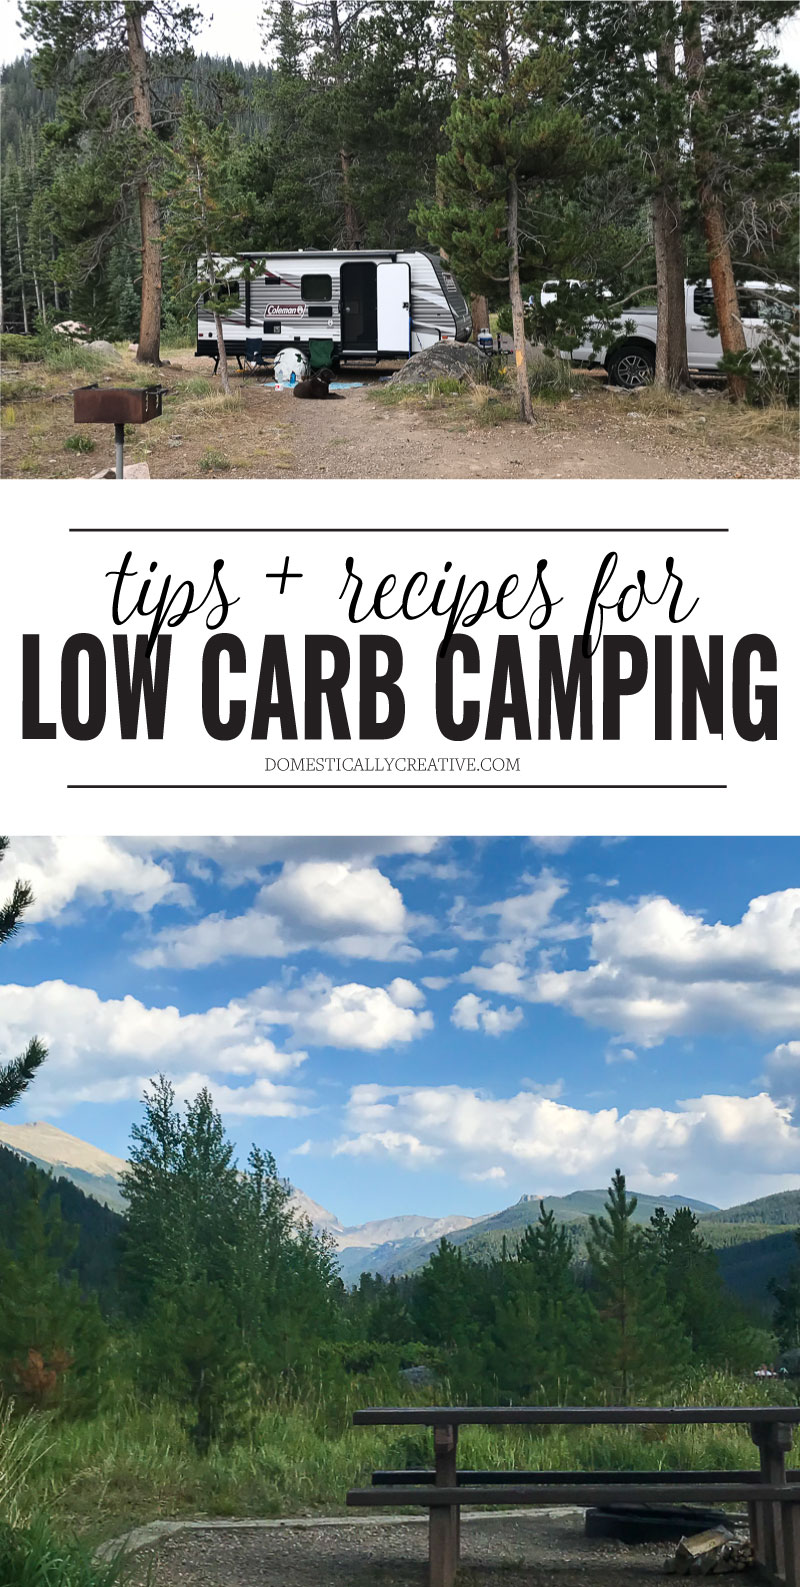 Tips, tricks and recipes for low carb camping